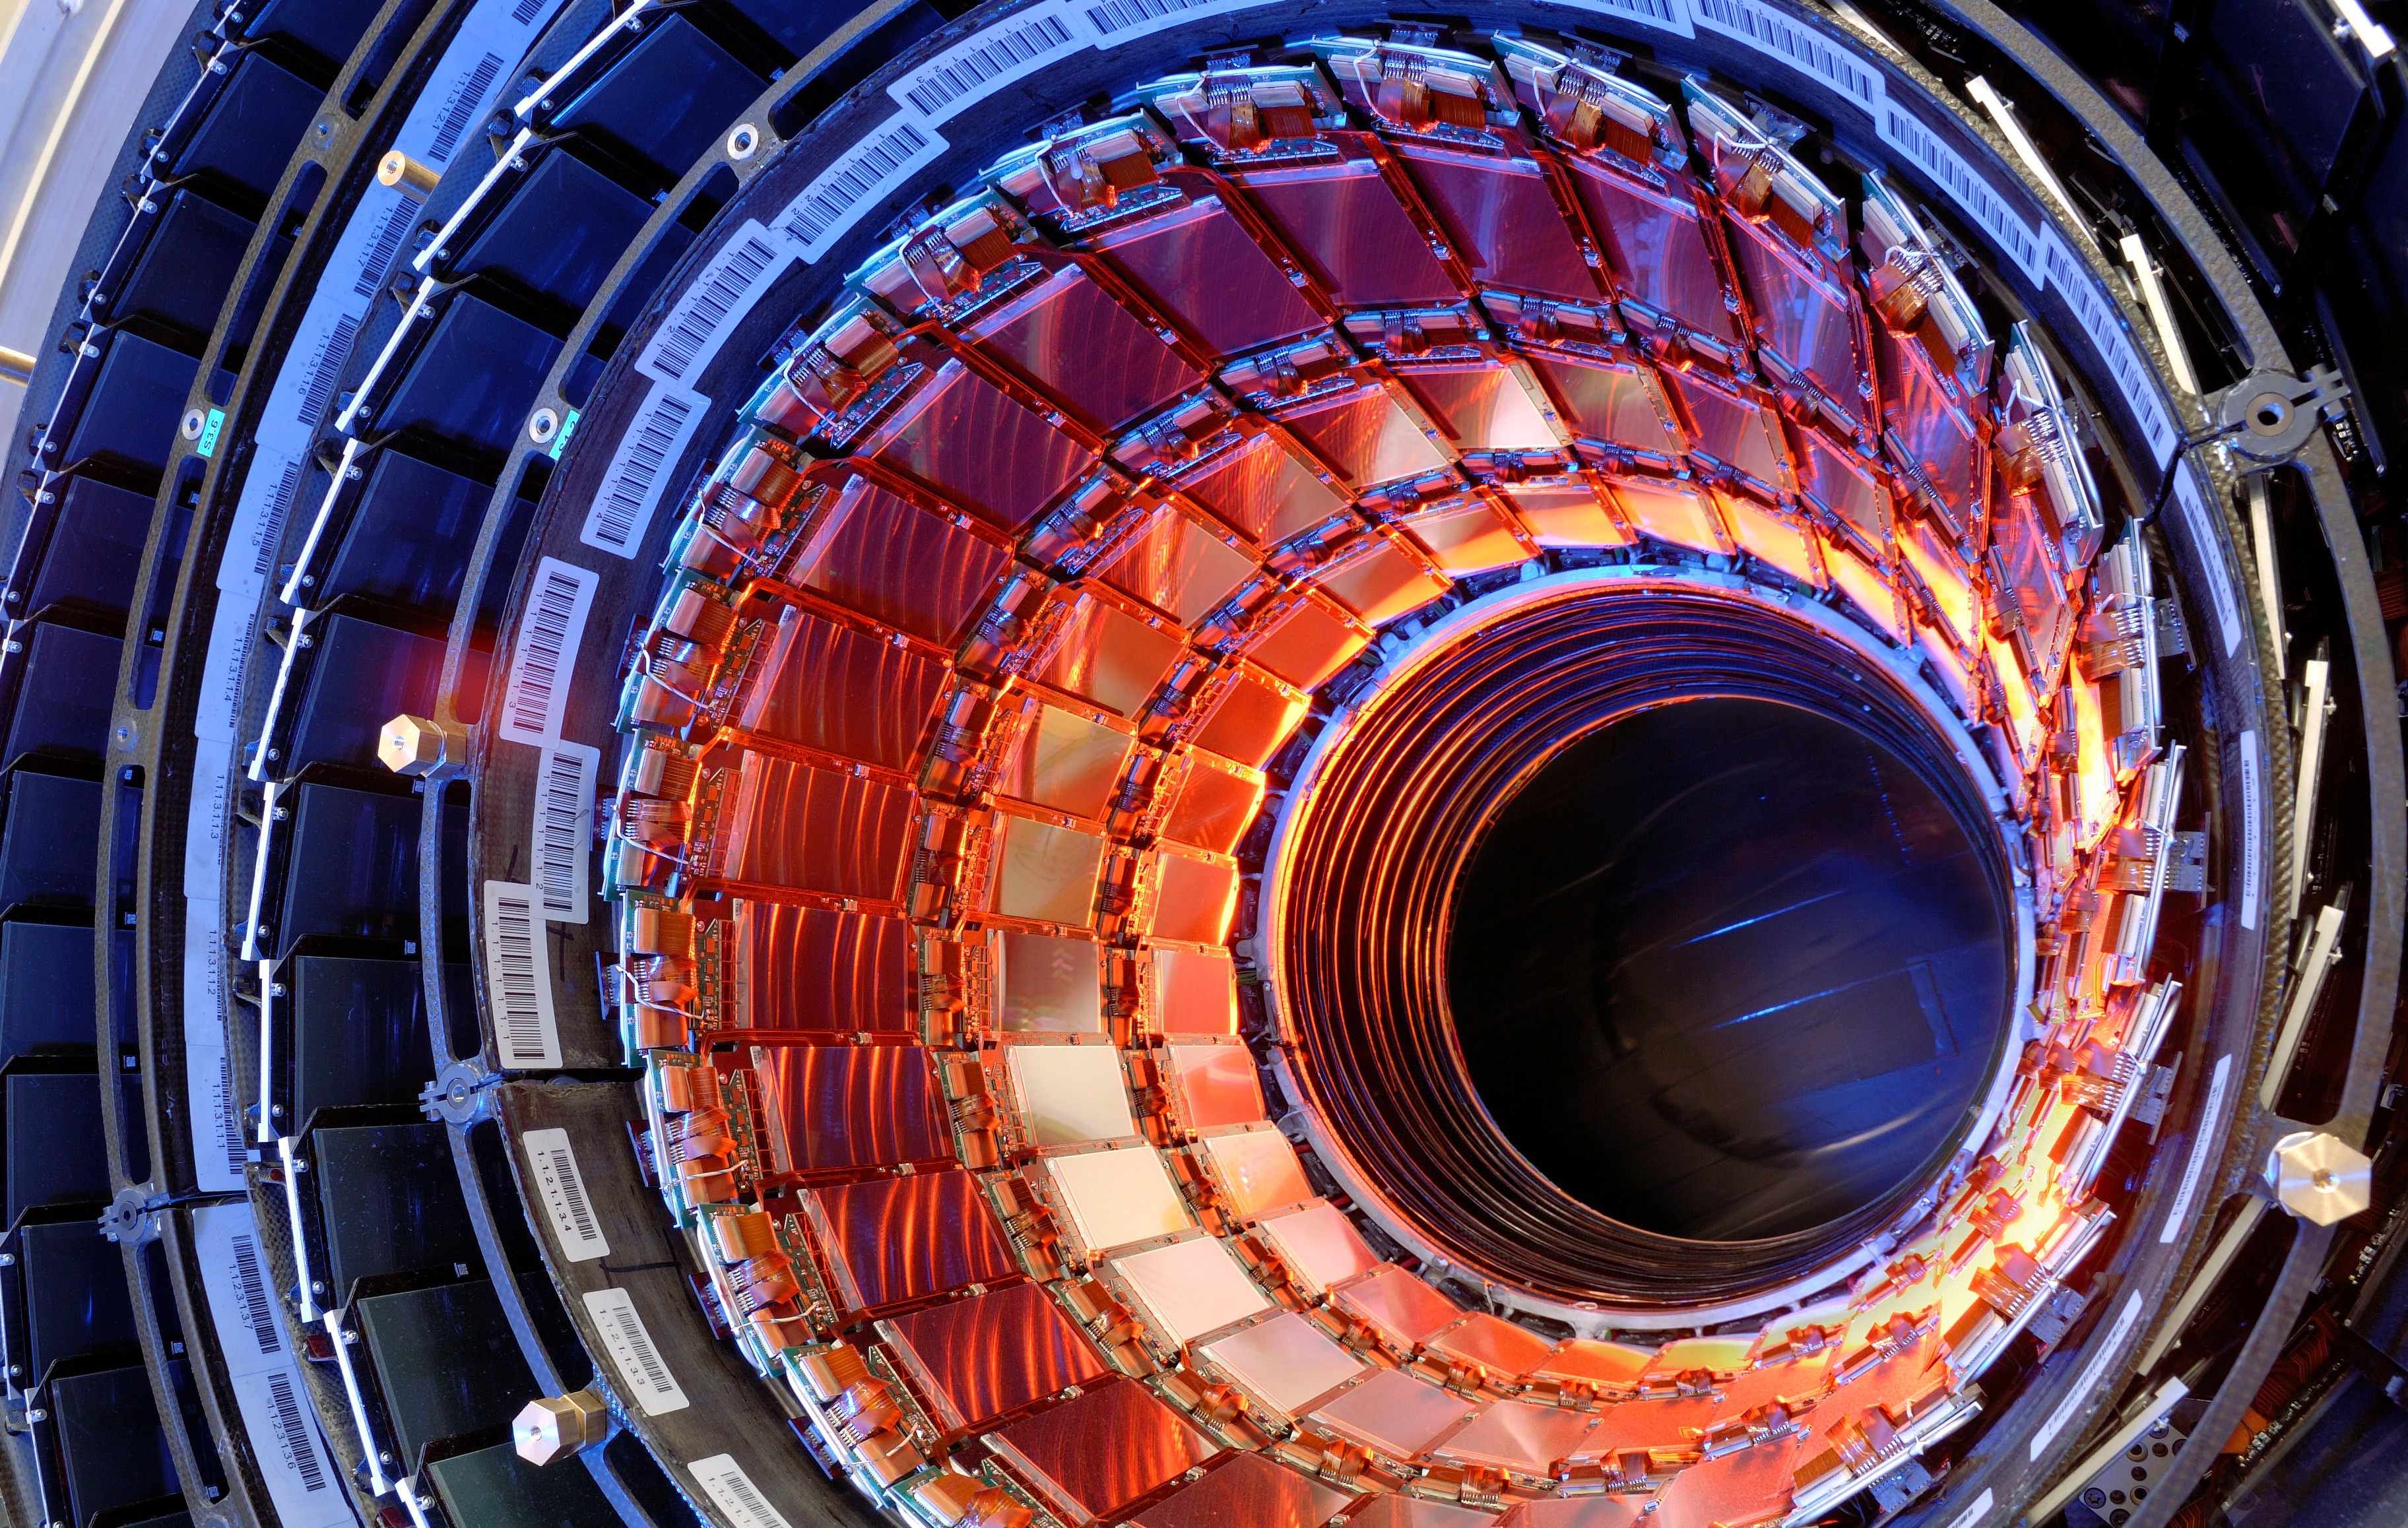 General 3649x2316 Large Hadron Collider technology science machine